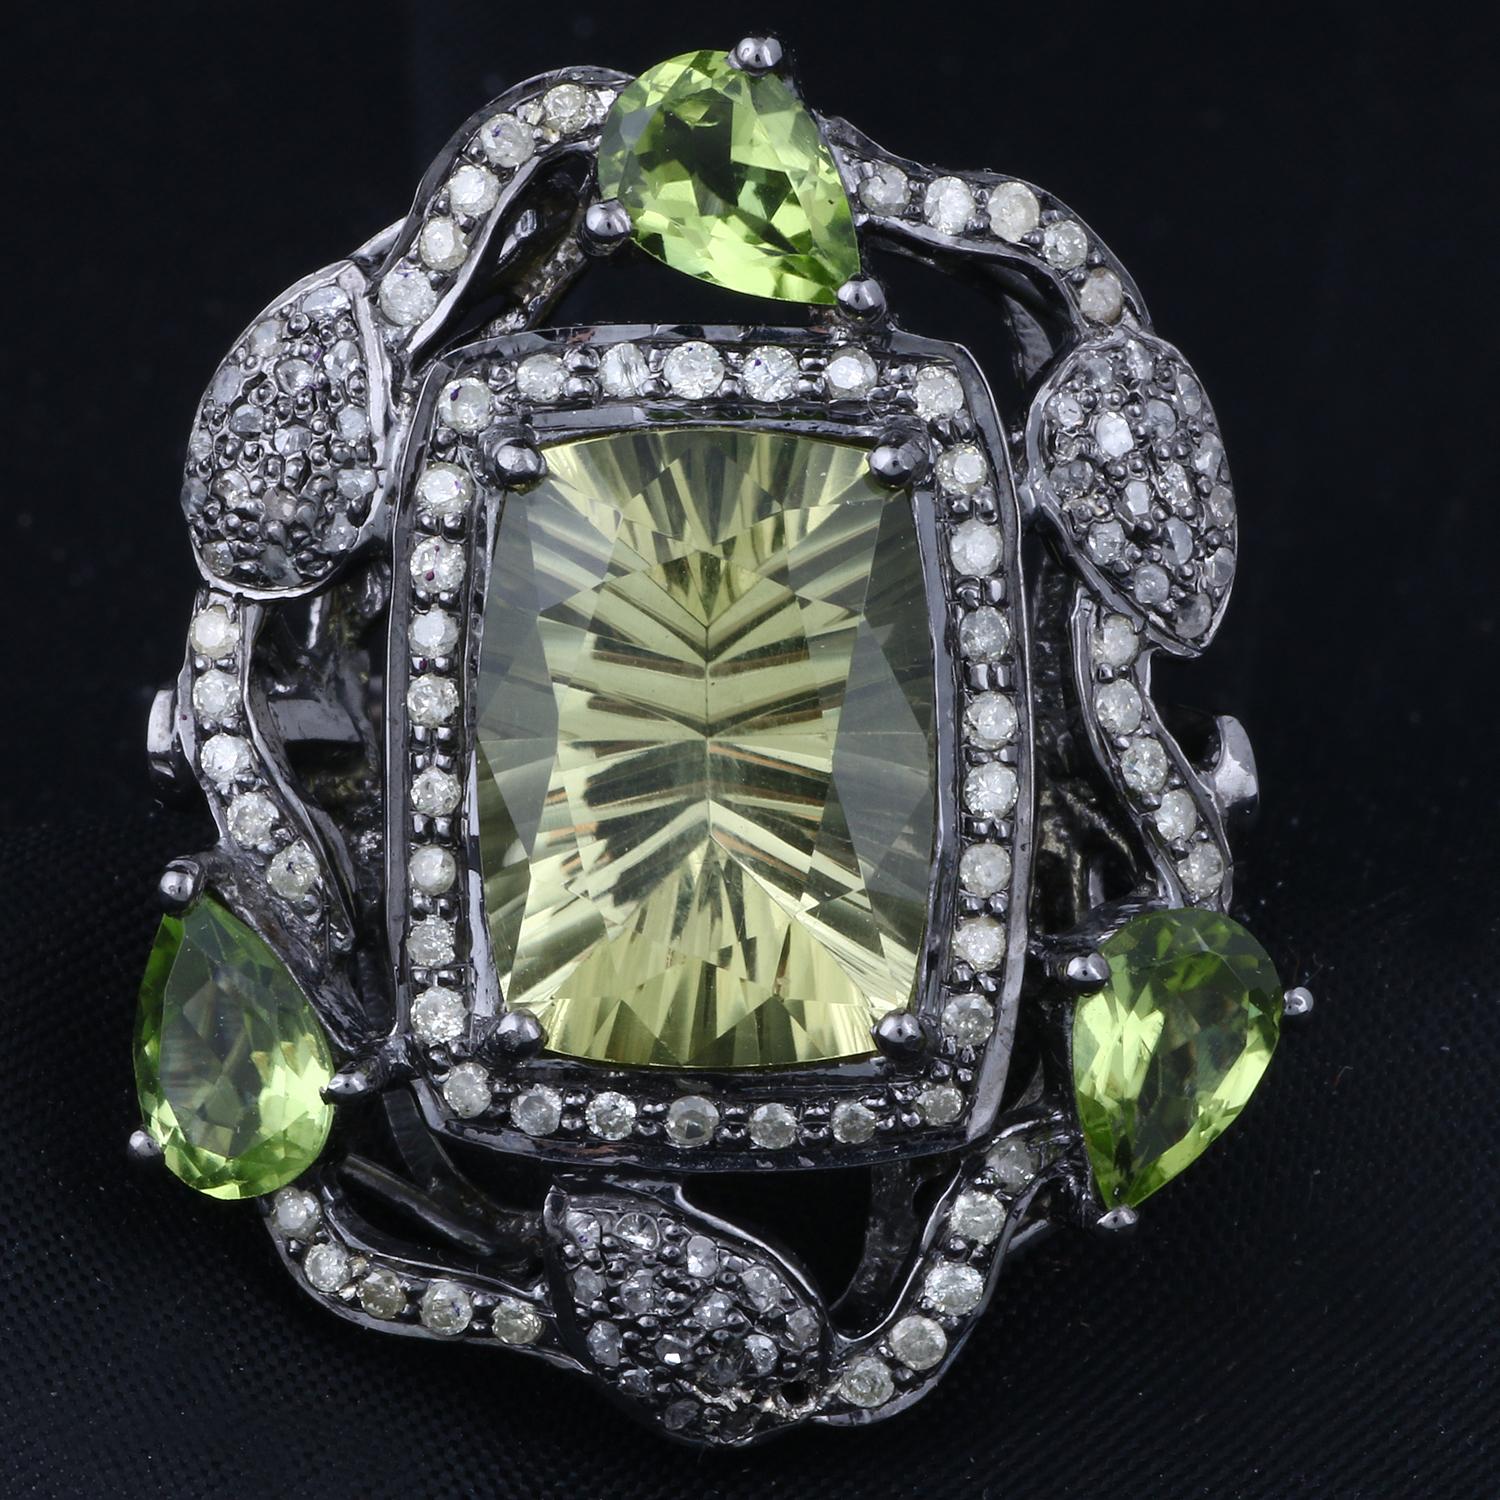 Item details:-

✦ SKU:- ESRG00156

✦ Material :- Silver
✦ Gemstone Specification:-
✧ Diamond
✧ Peridot

✦ Approx. Diamond Weight : 0.7
✦ Approx. Silver Weight : 7.54
✦ Approx. Gross Weight : 9.15

Ring Size (US): 7

You will Get the same Product as